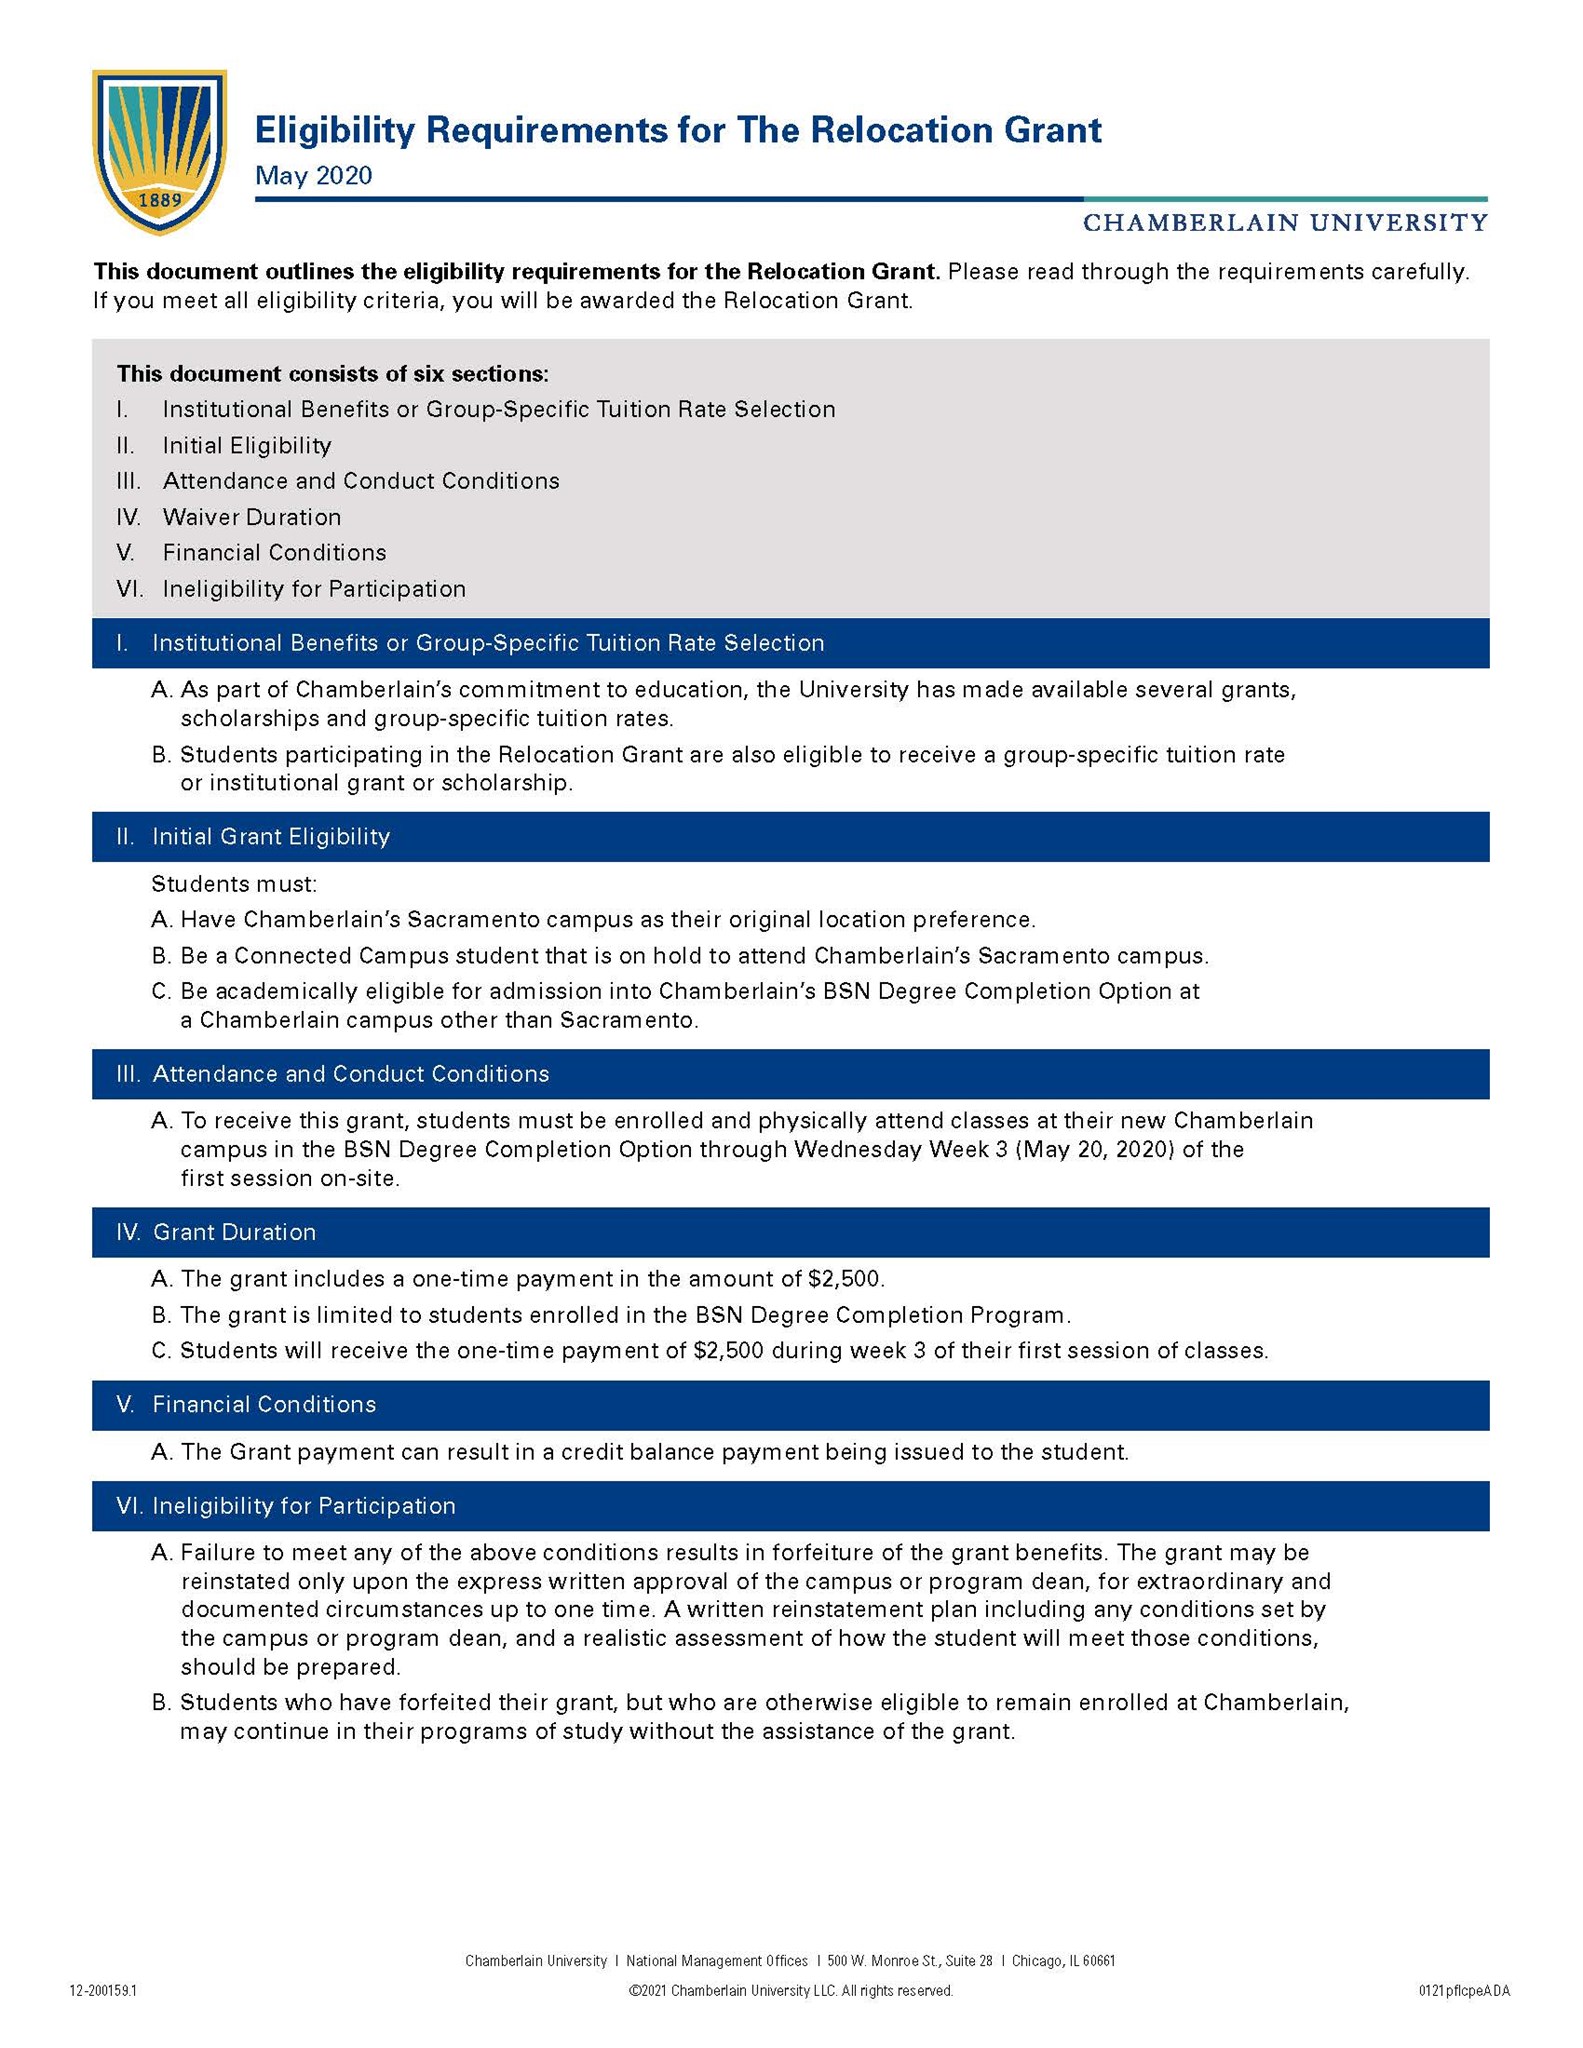 Picture of Eligibility Requirements for the Relocation Grant - May 2020